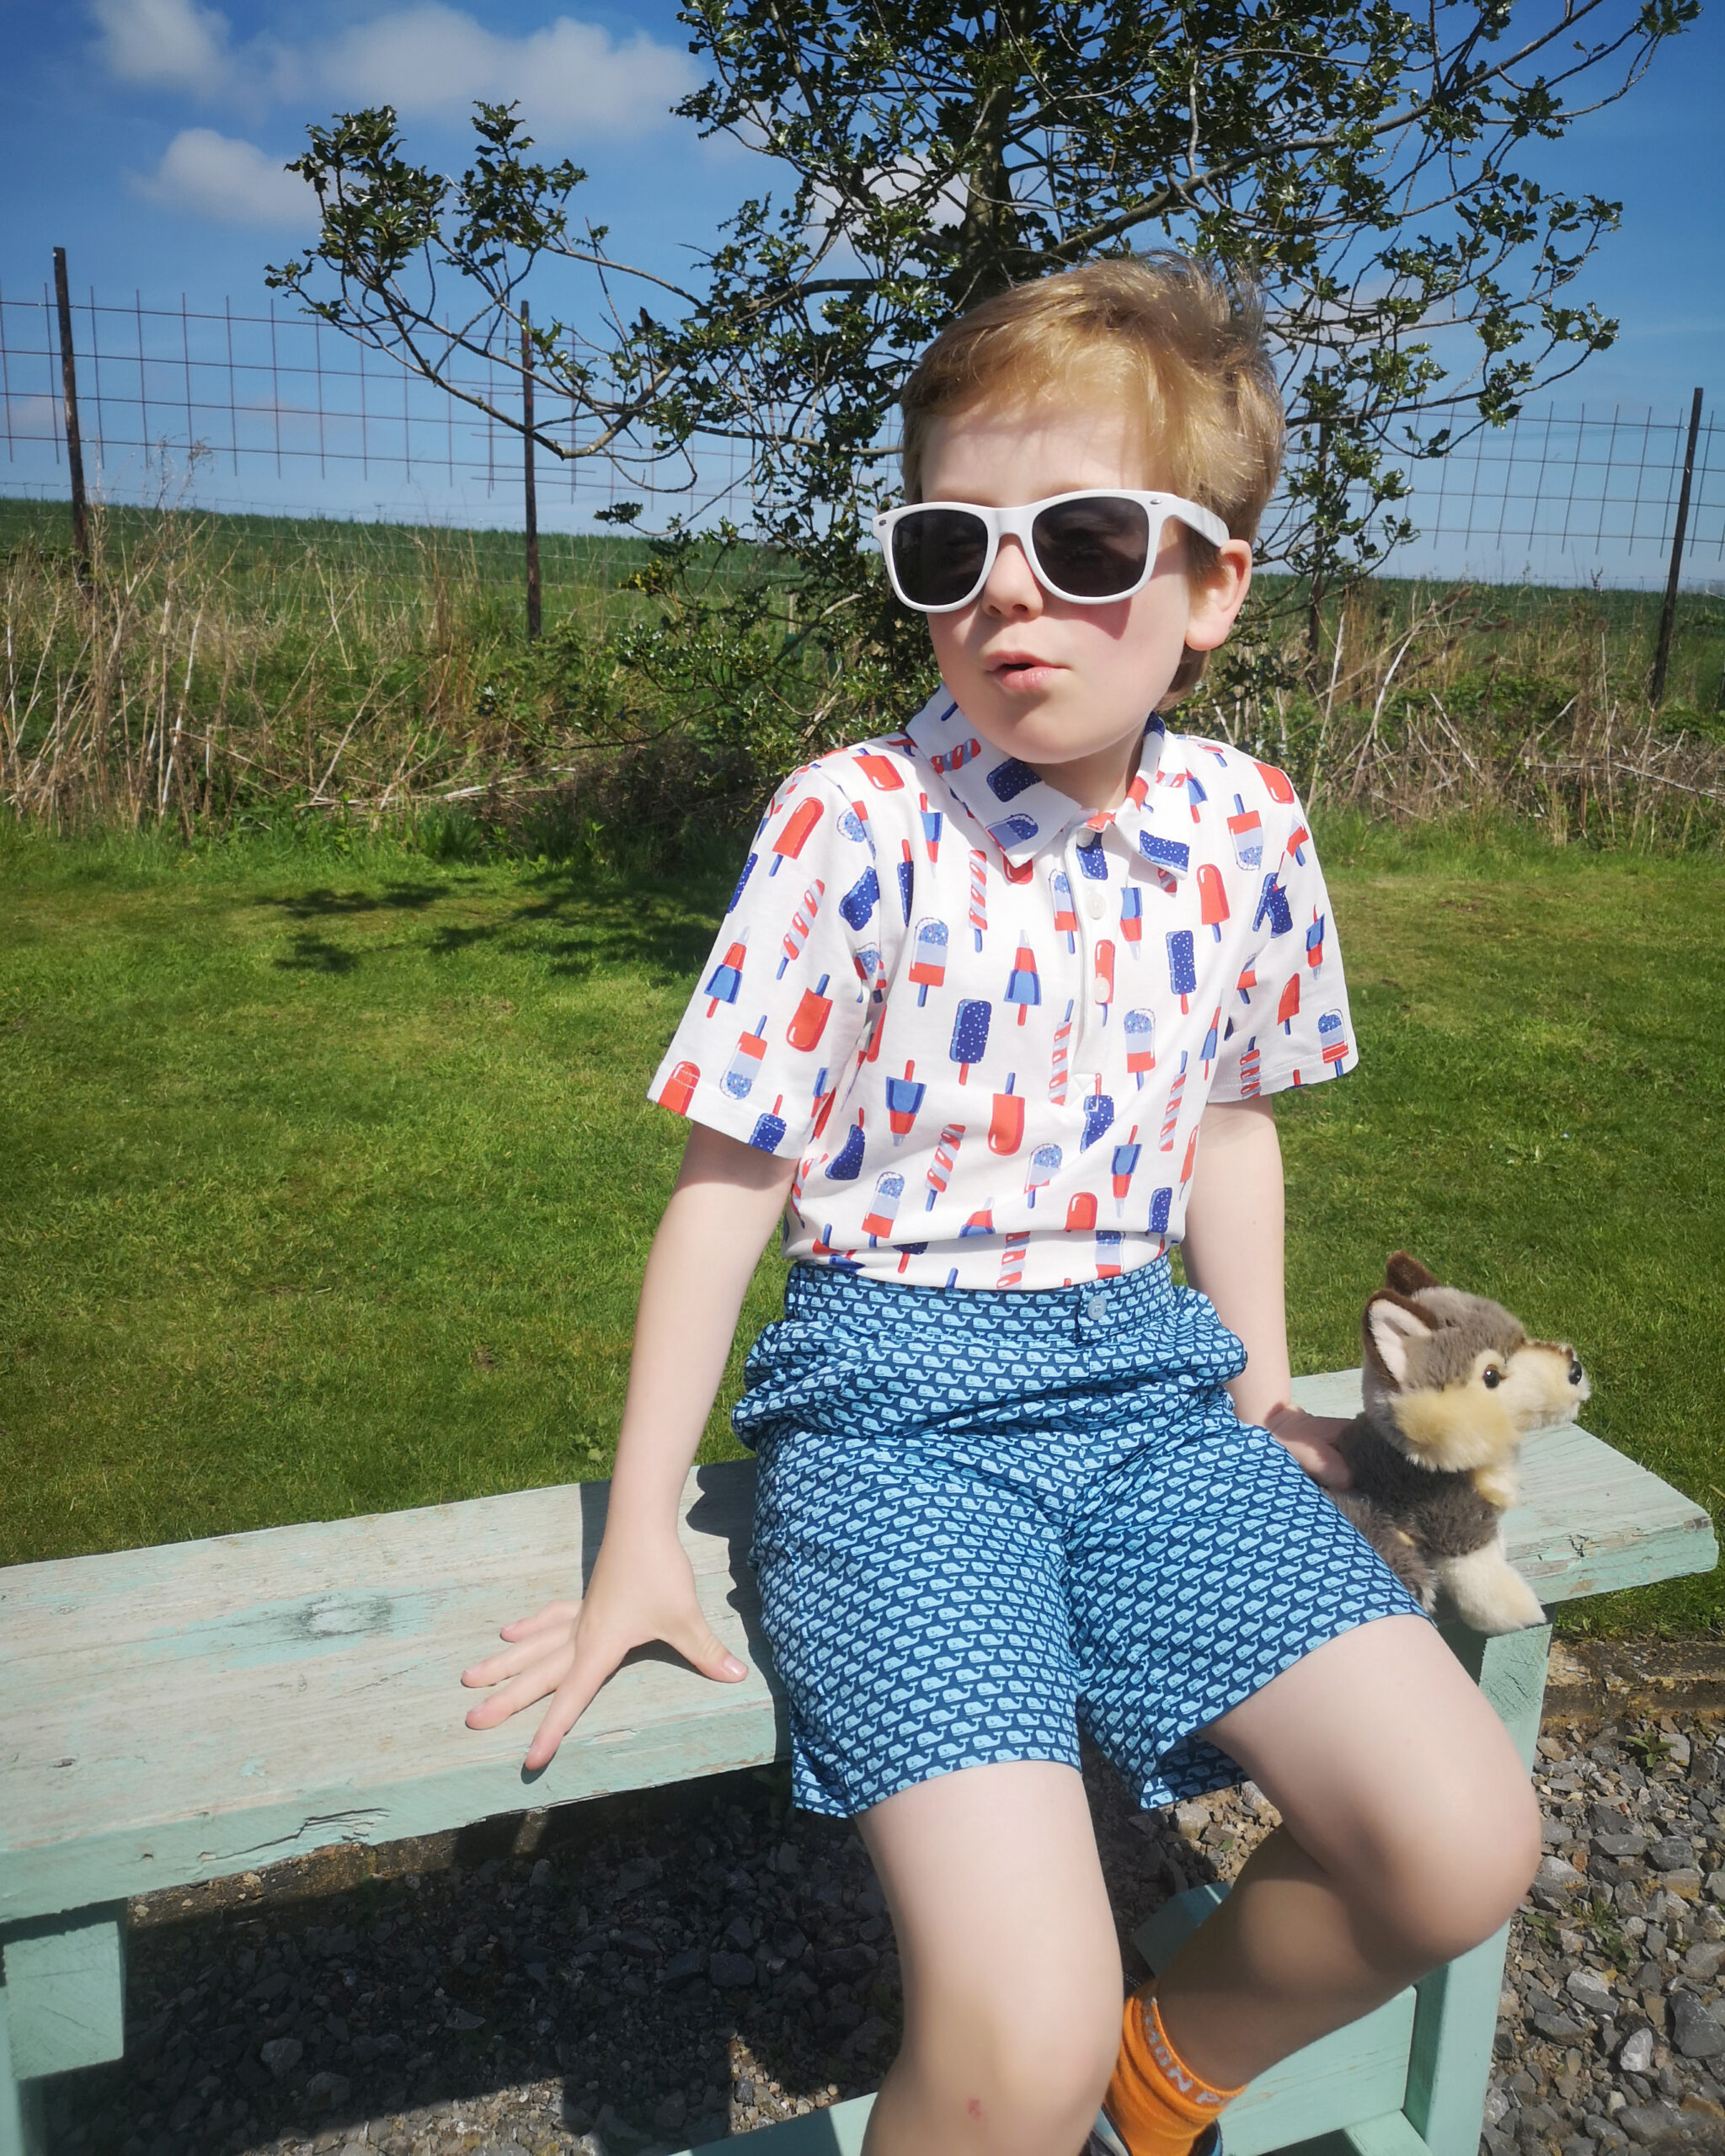 Rachel Riley SS23 Collection, Childrenswear, Luxury Brand, British Design, Rachel Riley, Kidswear, Vintage Vibes, 50s & 60s, Win, Fashion giveaway, the Frenchie Mummy, Win, Competition, Baby & Kids Clothing, London, Designed in England